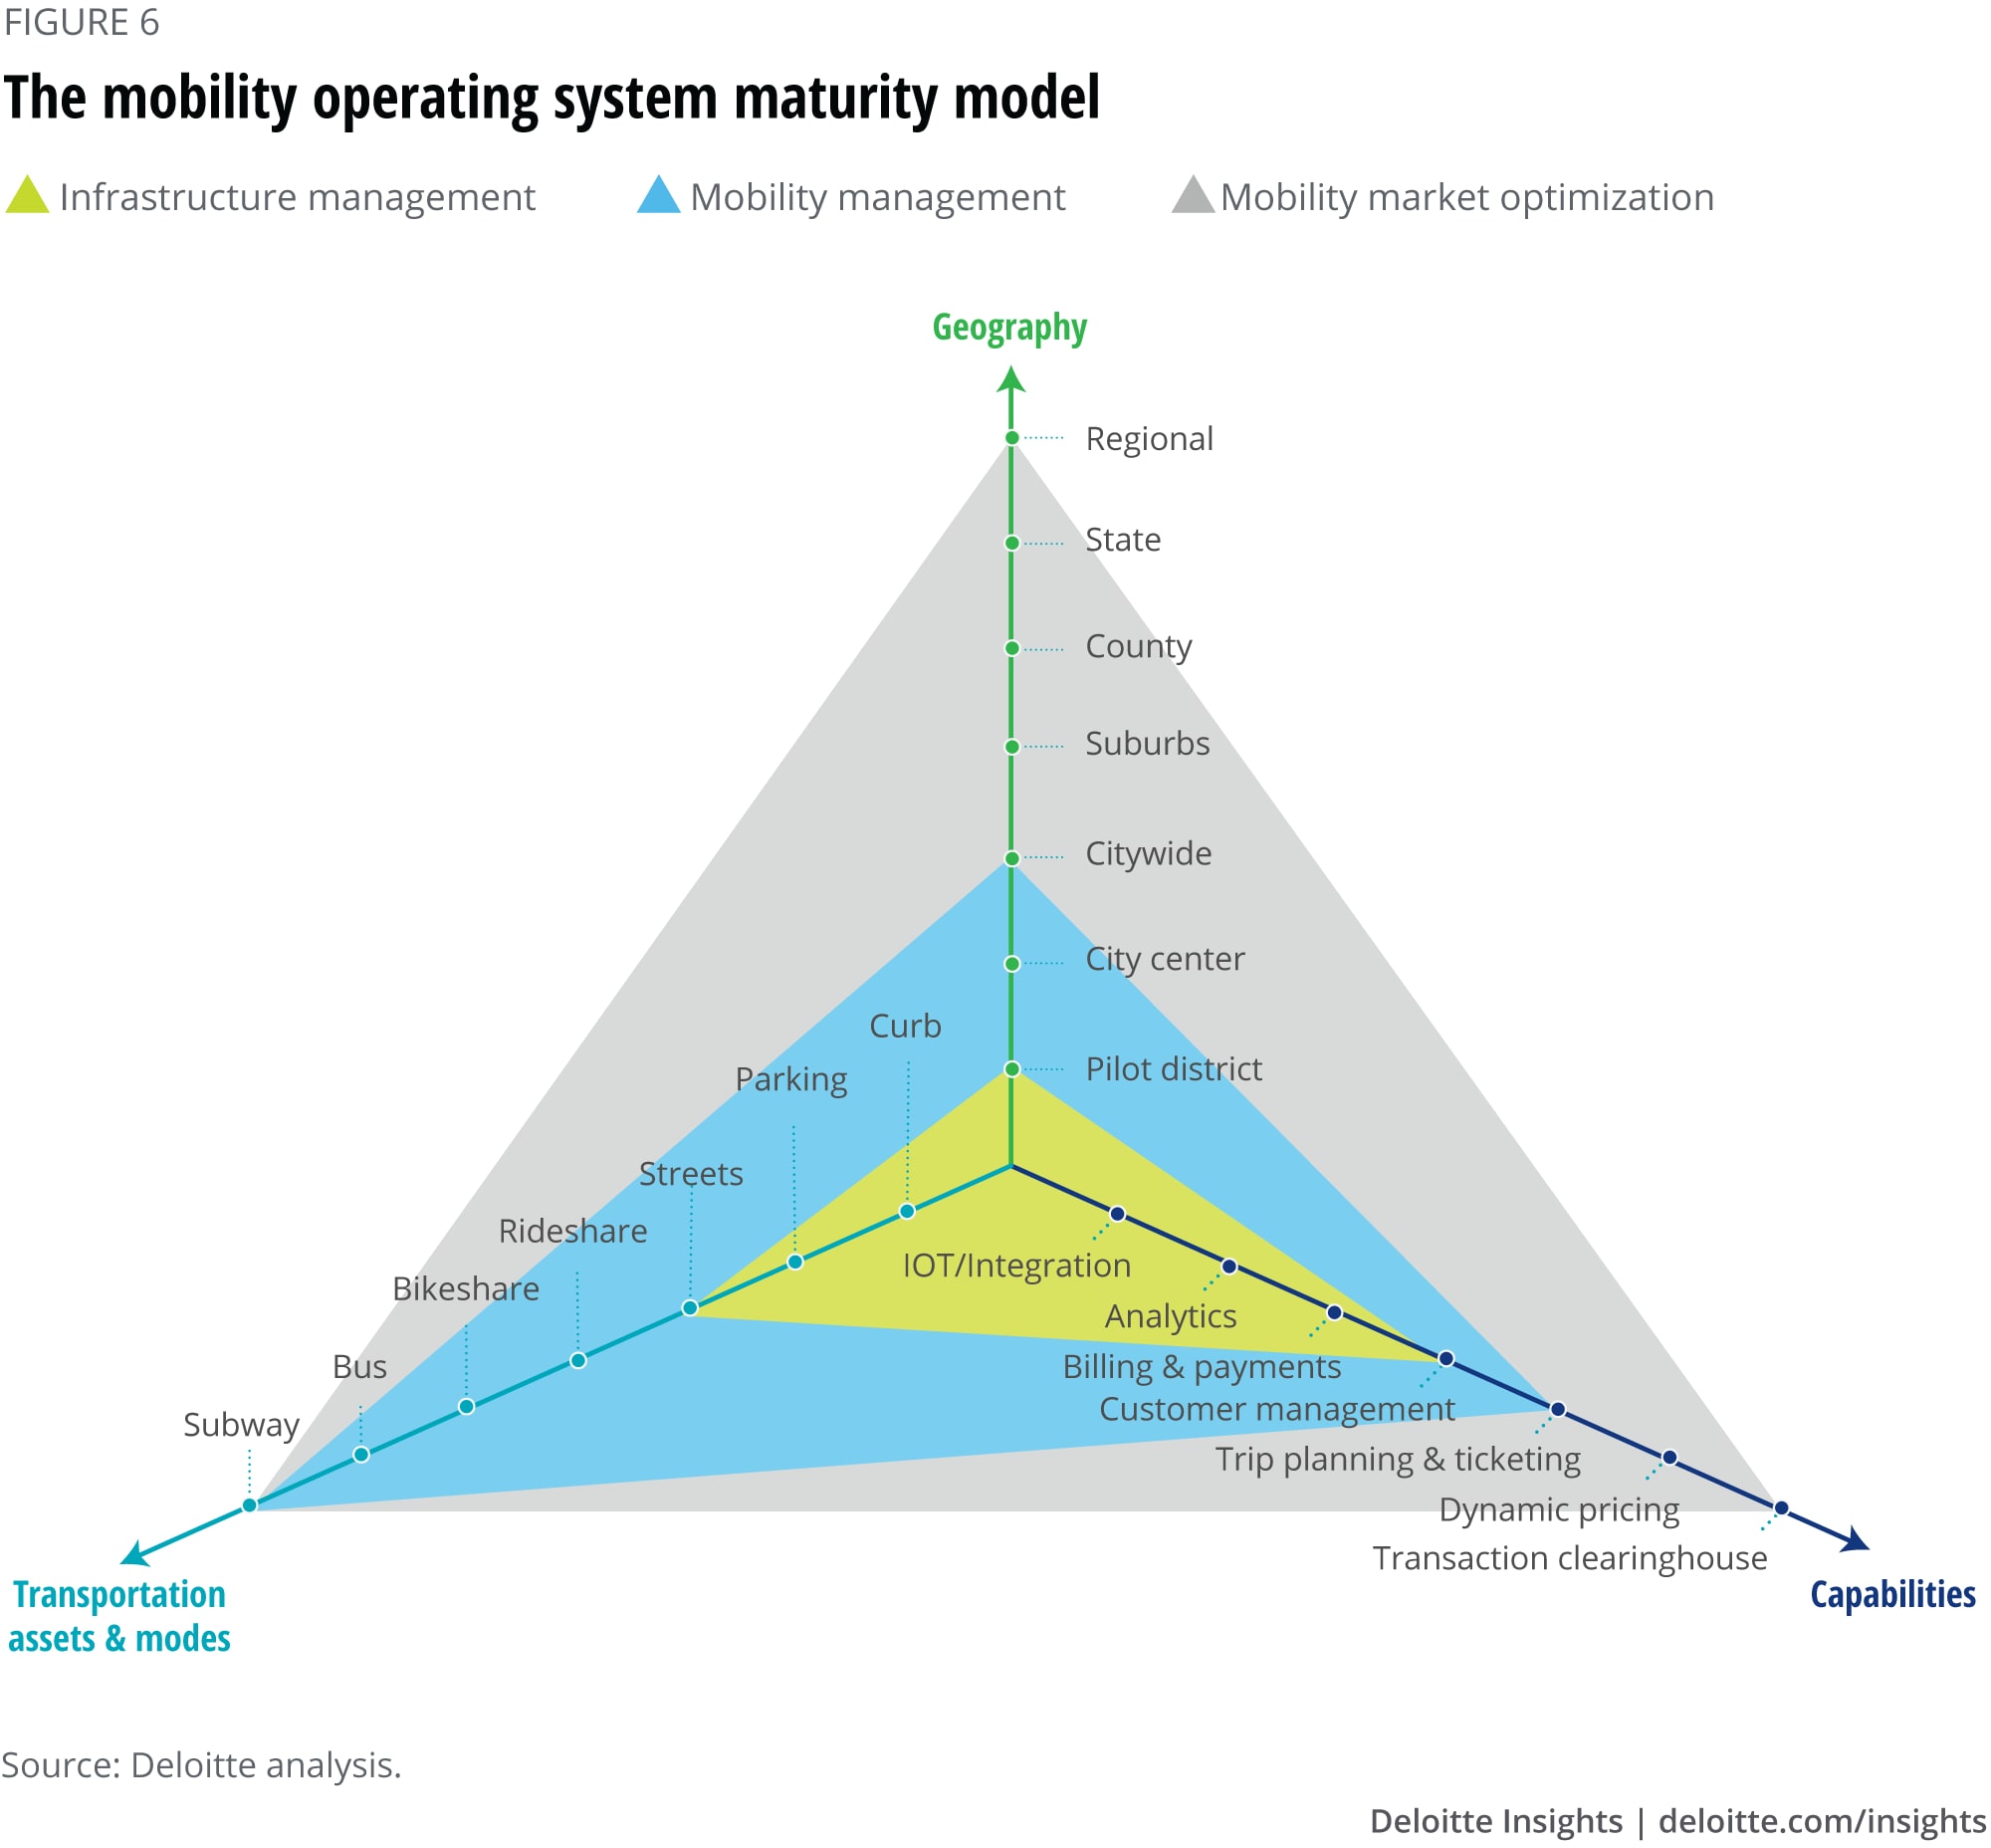 The mobility operating system maturity model